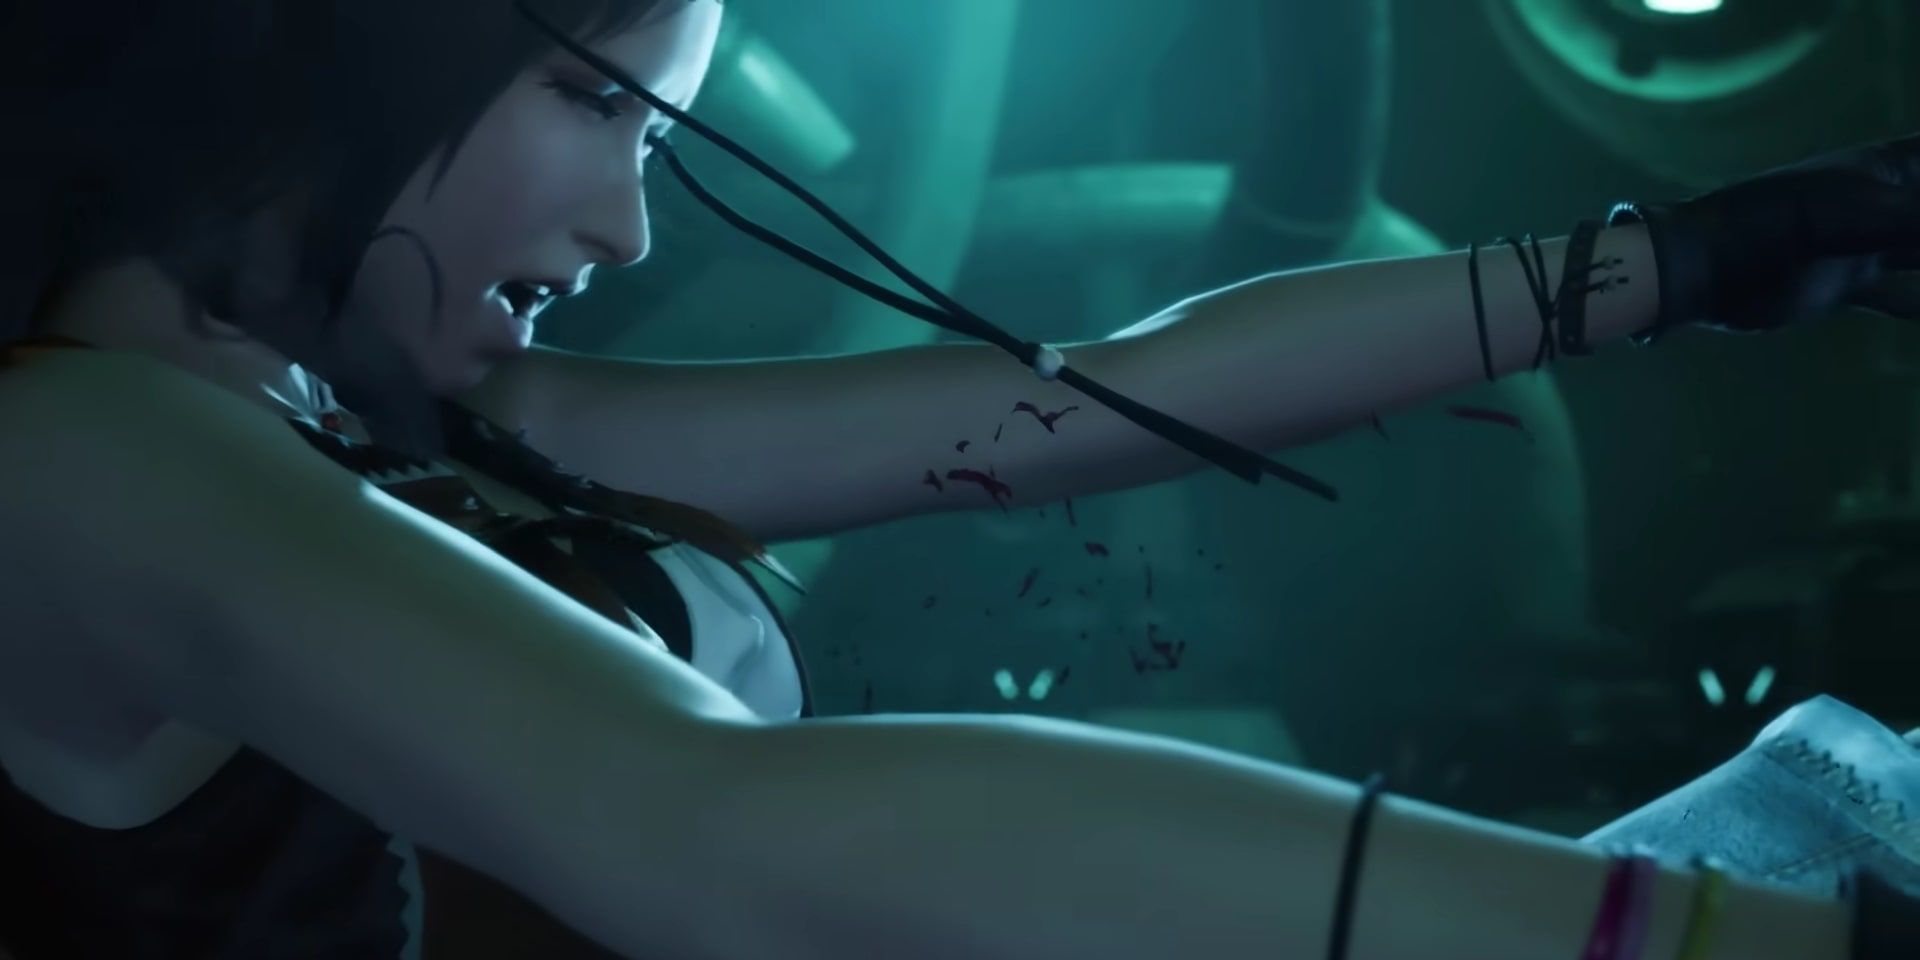 Final Fantasy 7 Rebirth Tifa falls back in the Nibelheim reactor after being attacked by Sephiroth